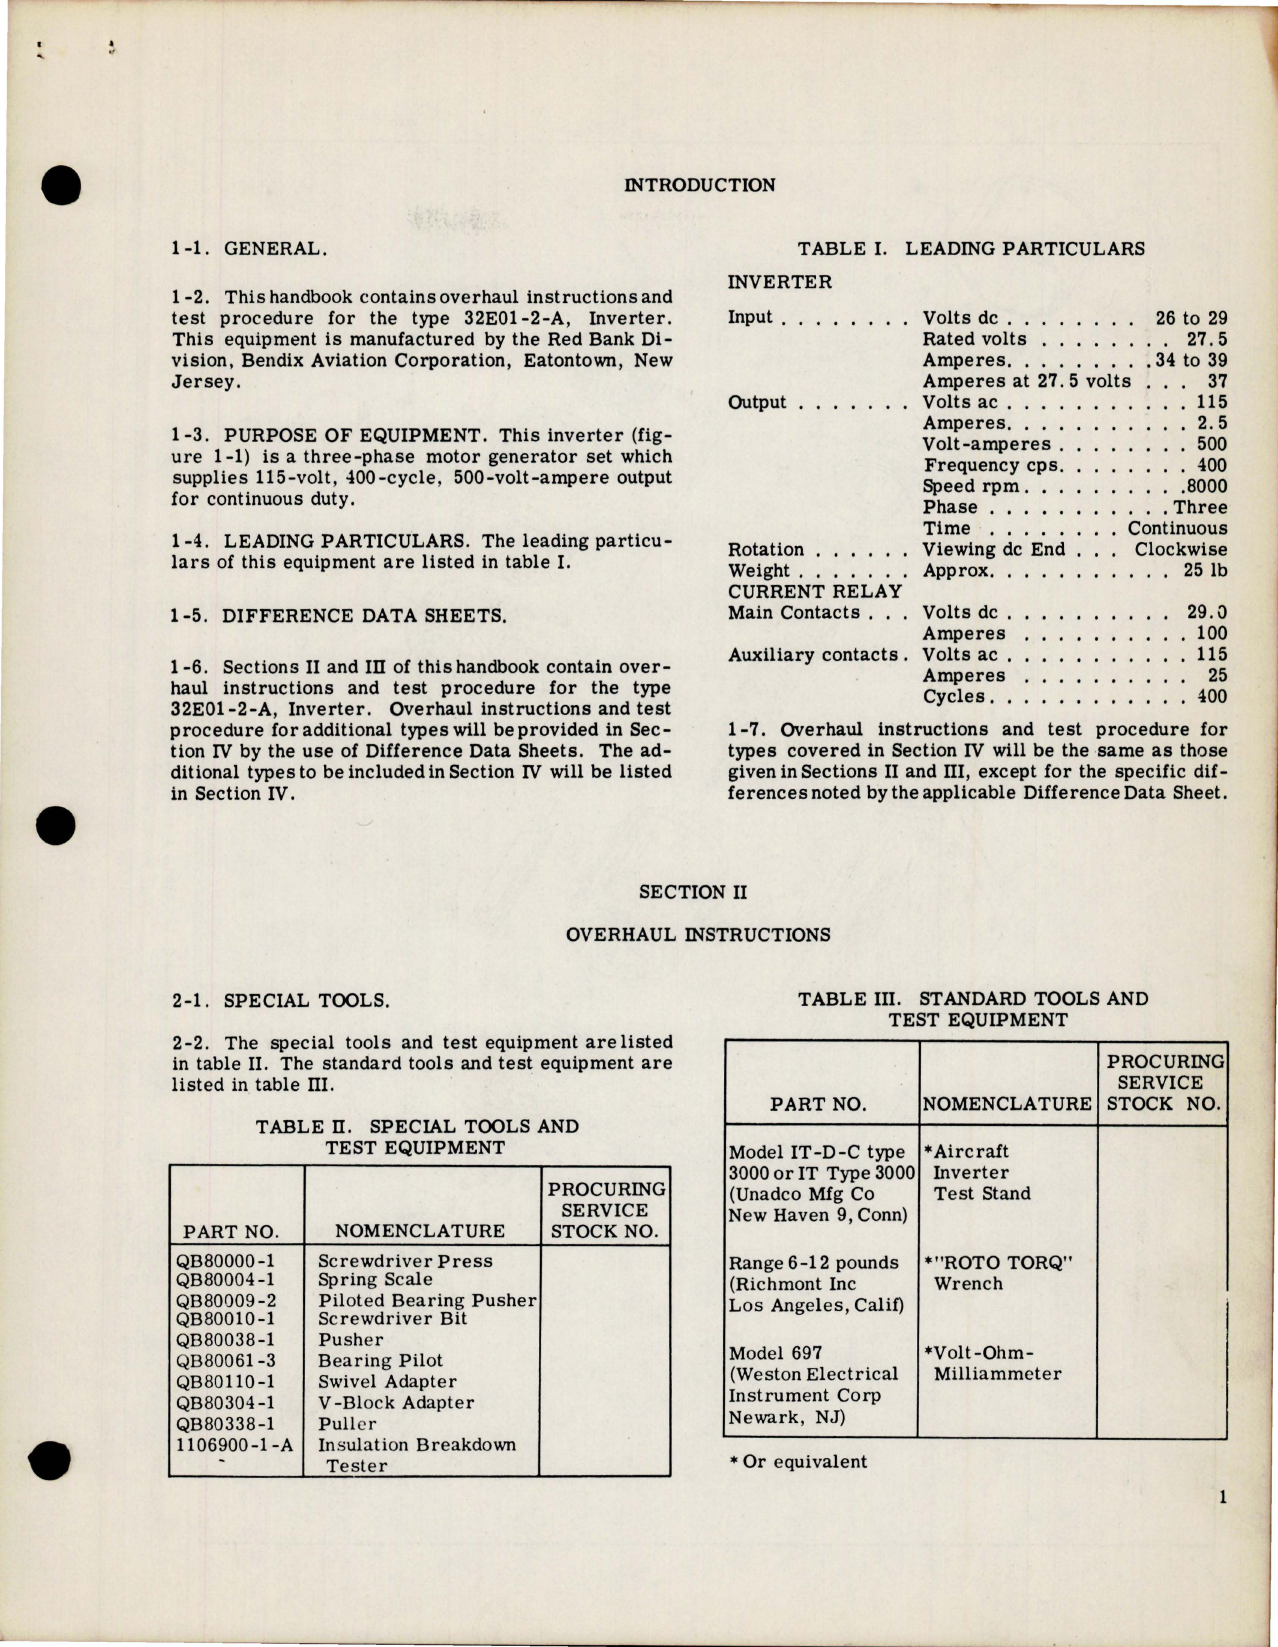 Sample page 5 from AirCorps Library document: Overhaul Instructions for Inverter - Type 32E01-2-A